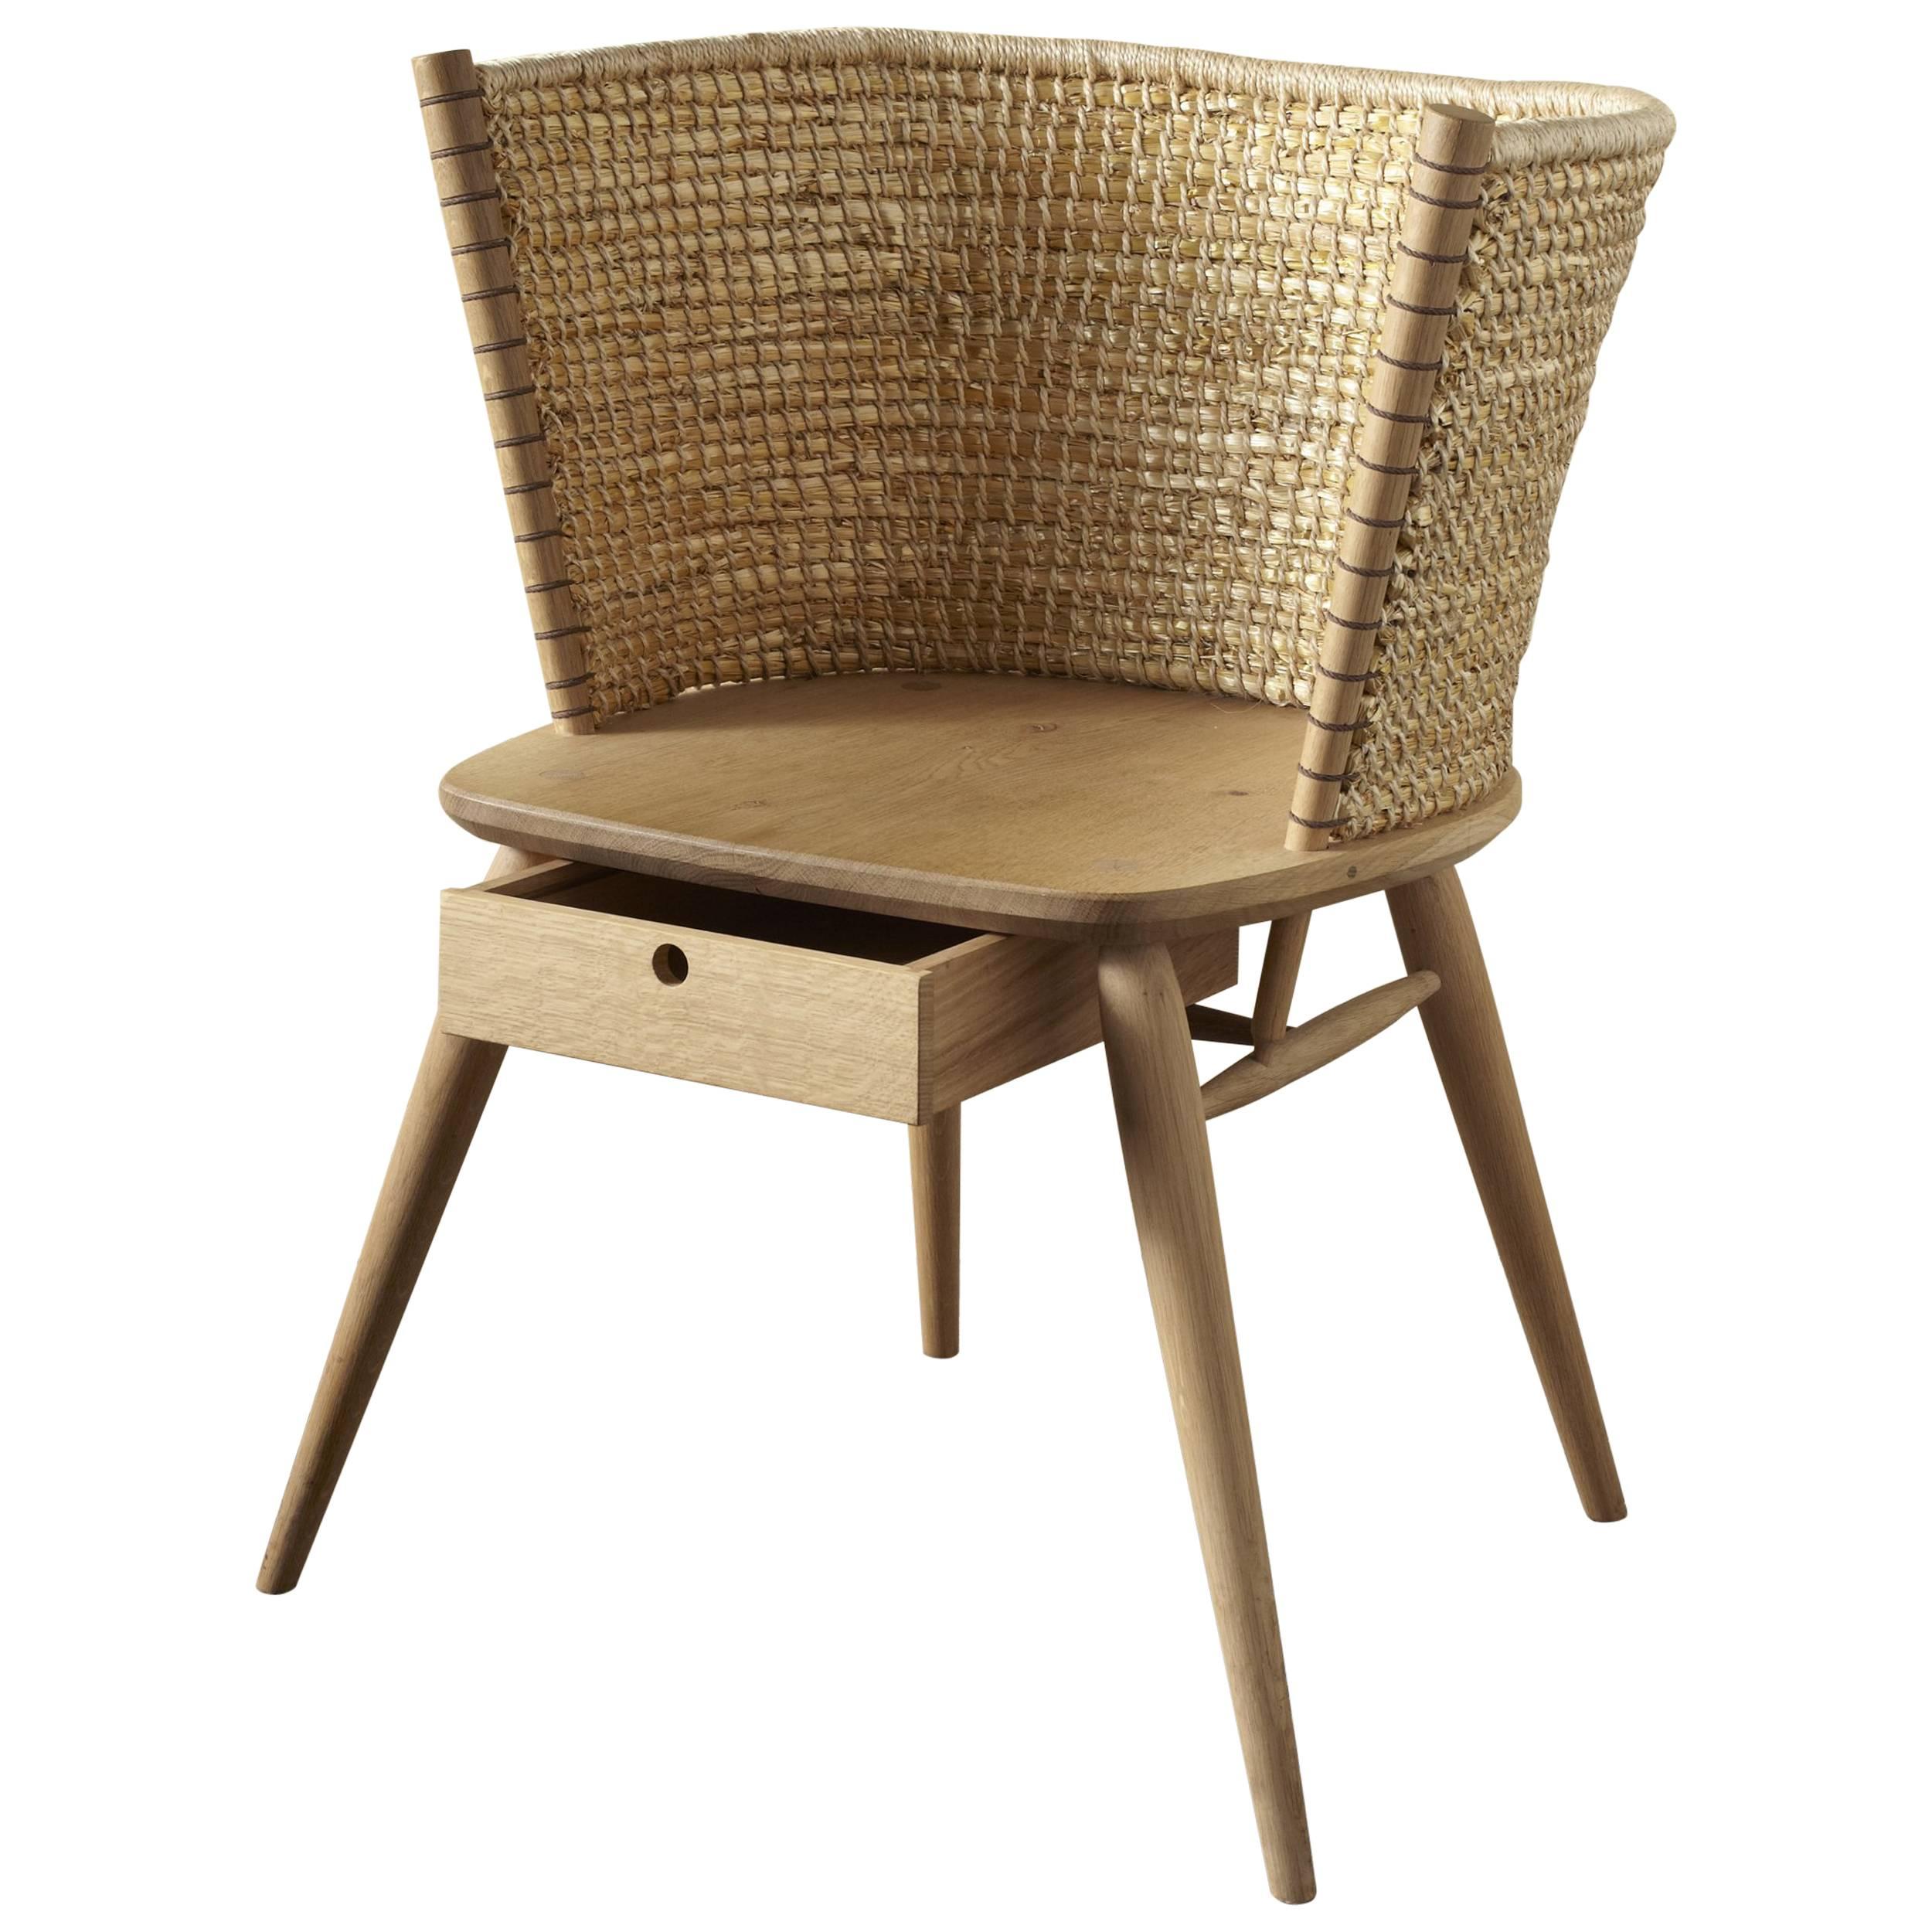 Handwoven Straw and British Oak Orkney Style Brodgar Chair by Gareth Neal For Sale